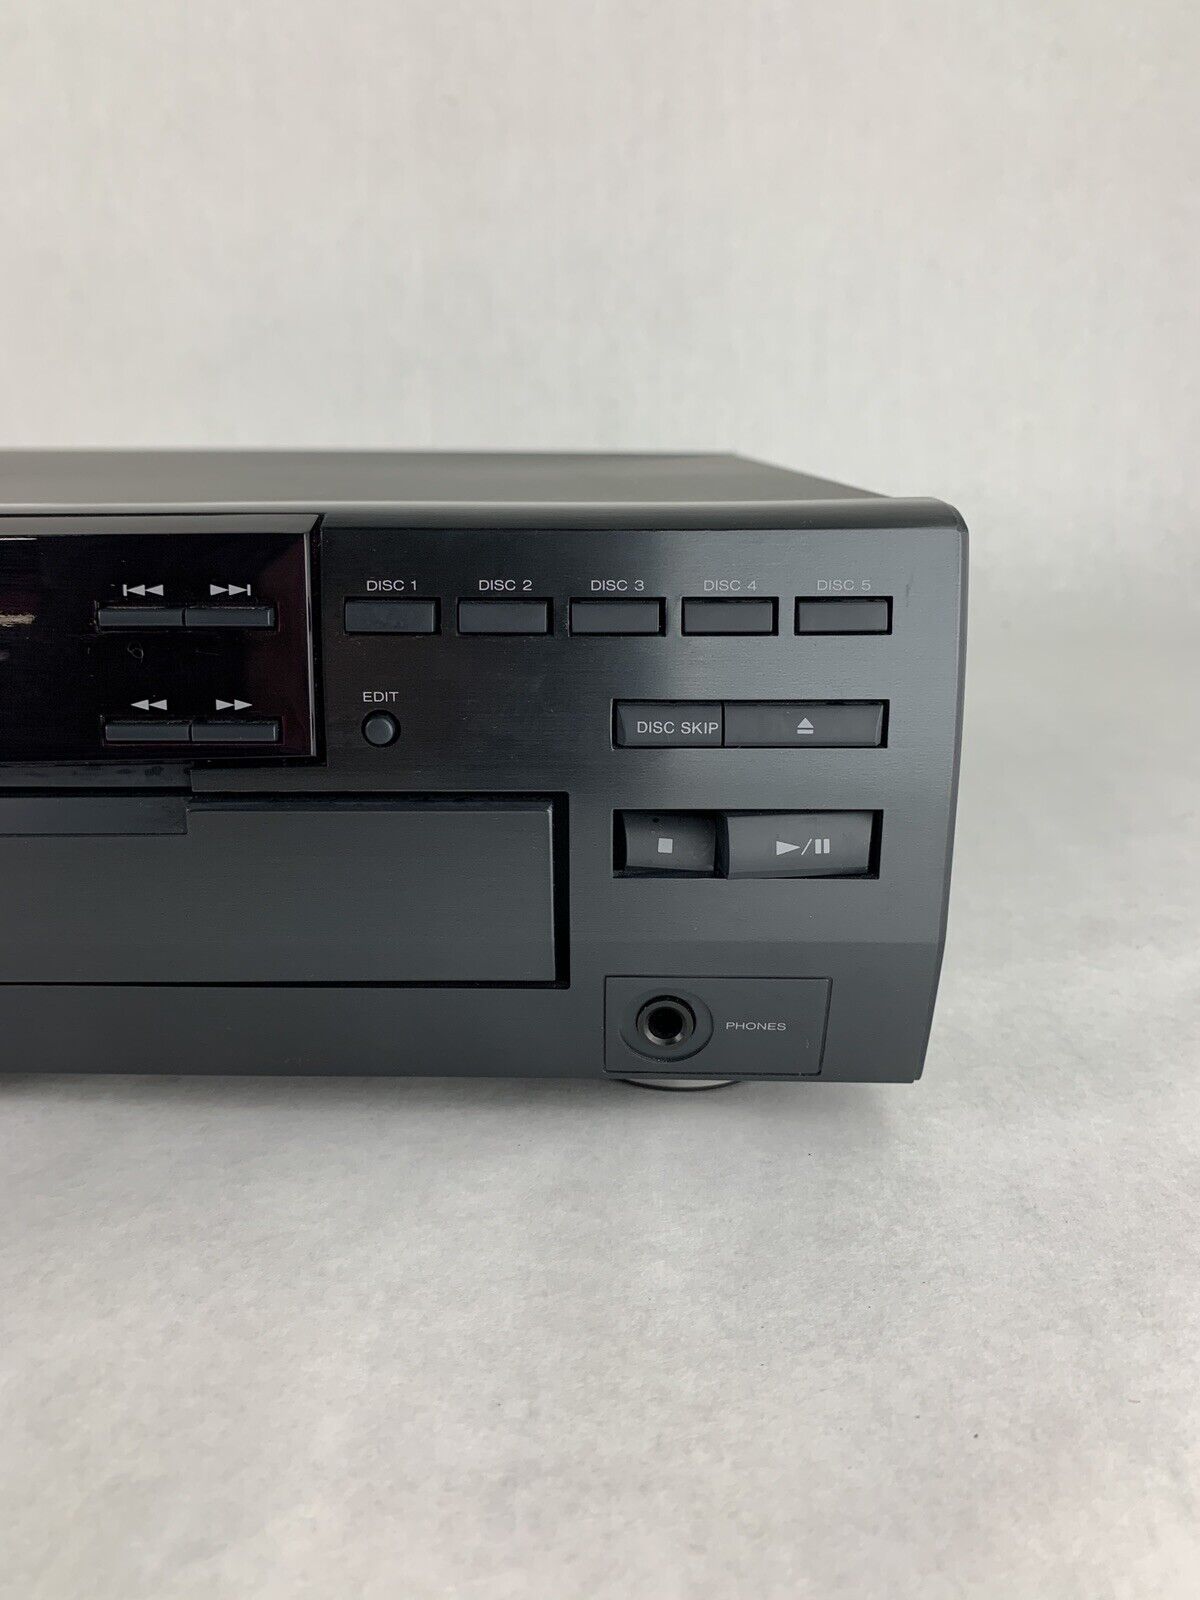 Kenwood CD-204 5-Disc CD Changer Missing Remote Broken Stop/Pause Buttons Tested